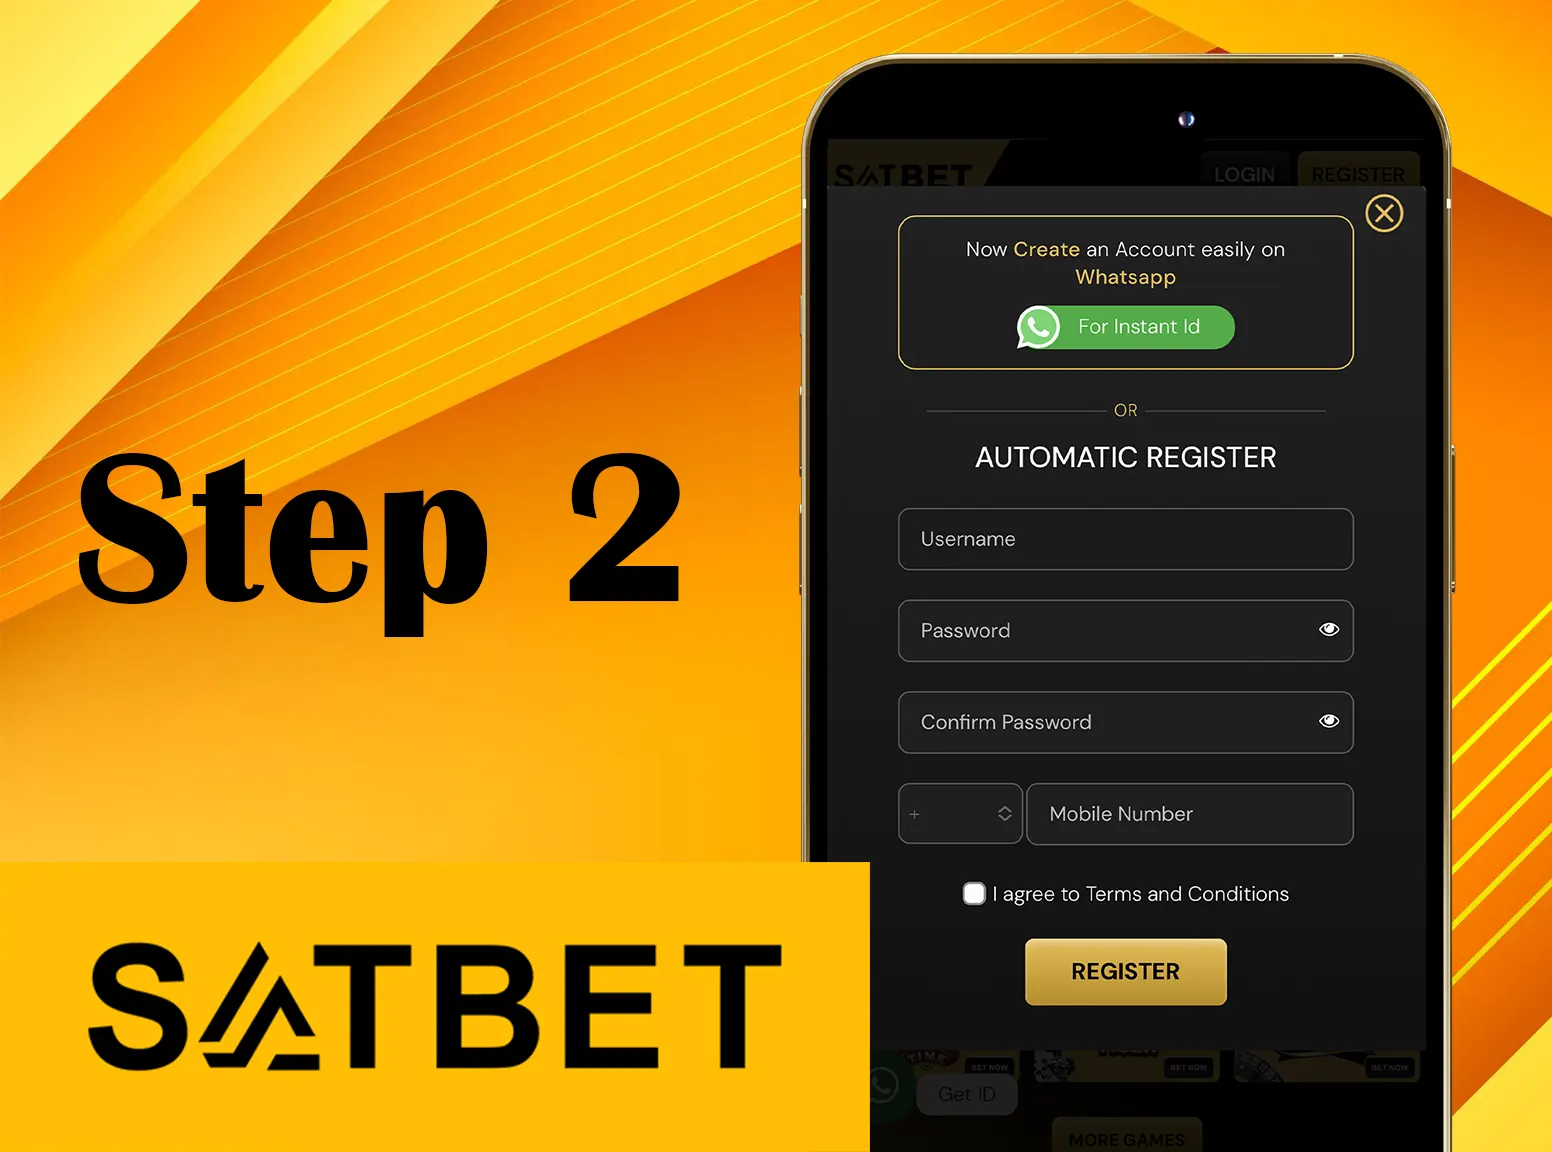 Create a new account or login with your username and password to start playing on the Satbet website.